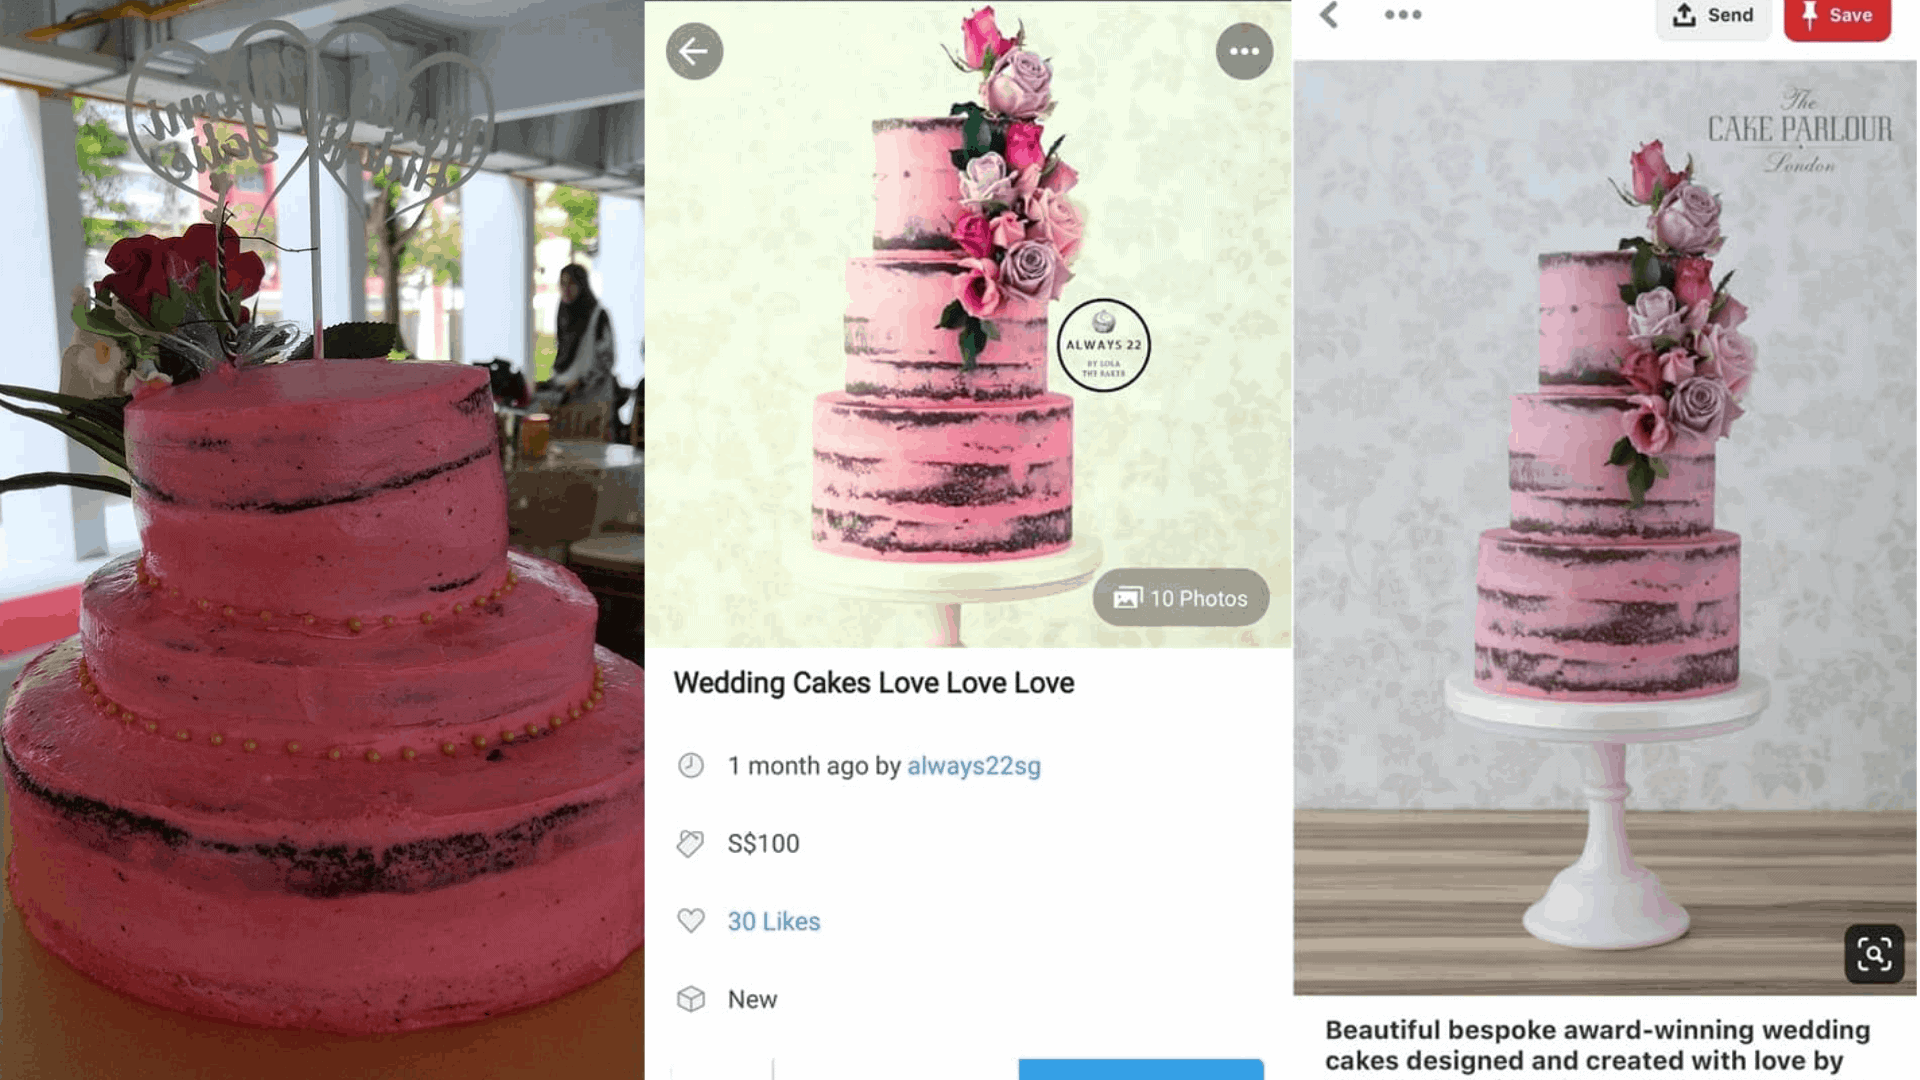 Baker Delivers Crooked Cake Decorated With Dusty Fake Flowers